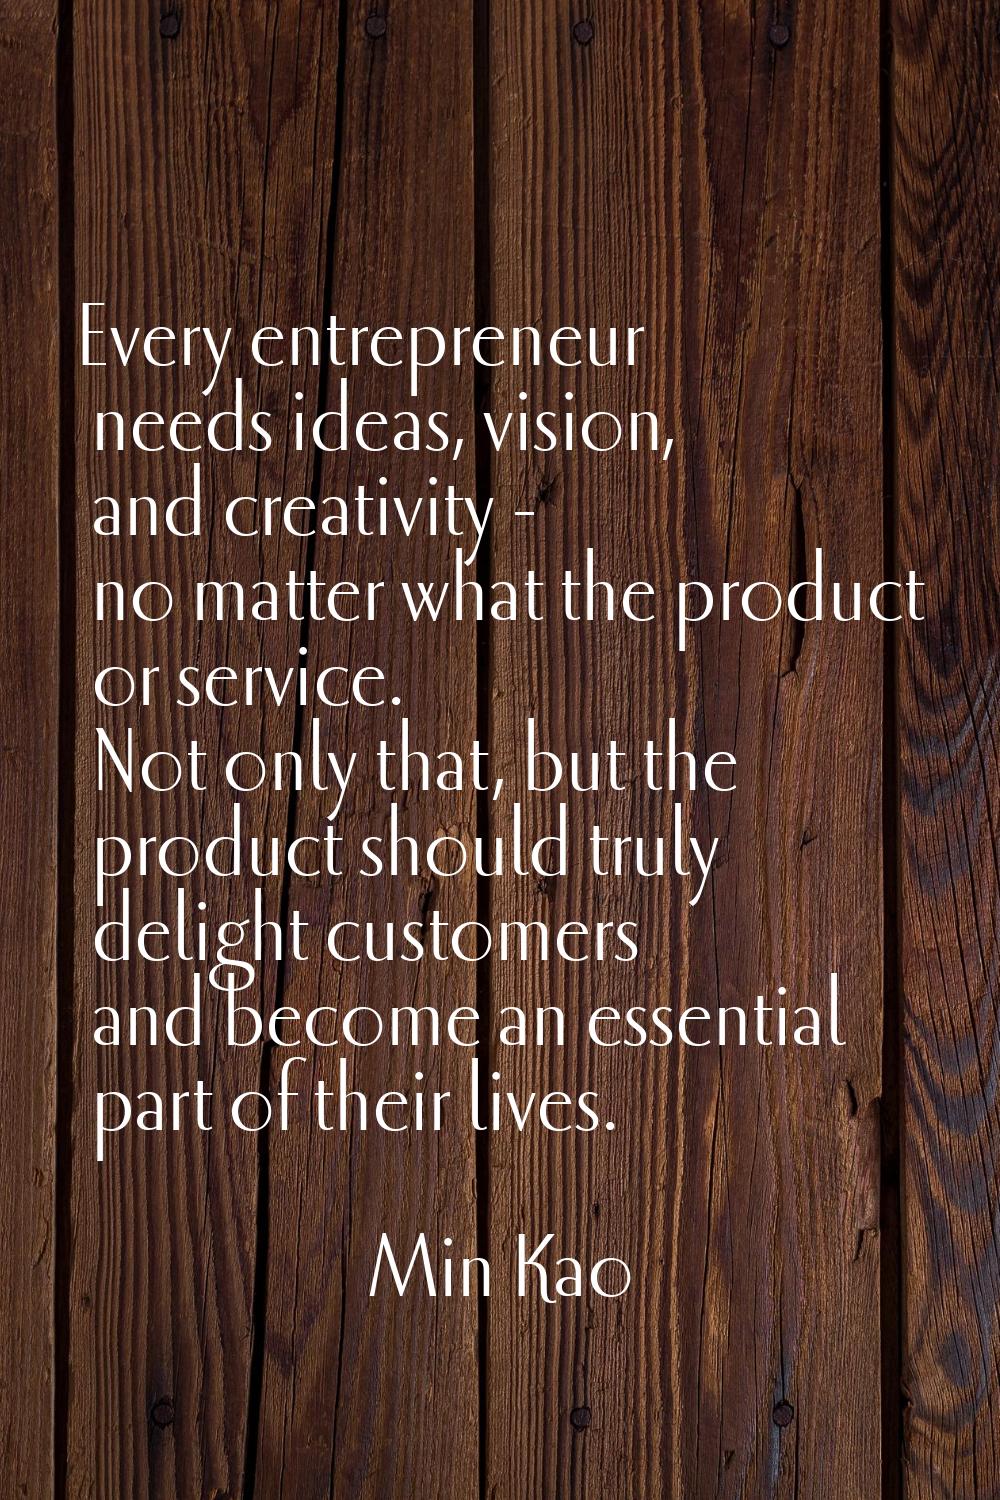 Every entrepreneur needs ideas, vision, and creativity - no matter what the product or service. Not